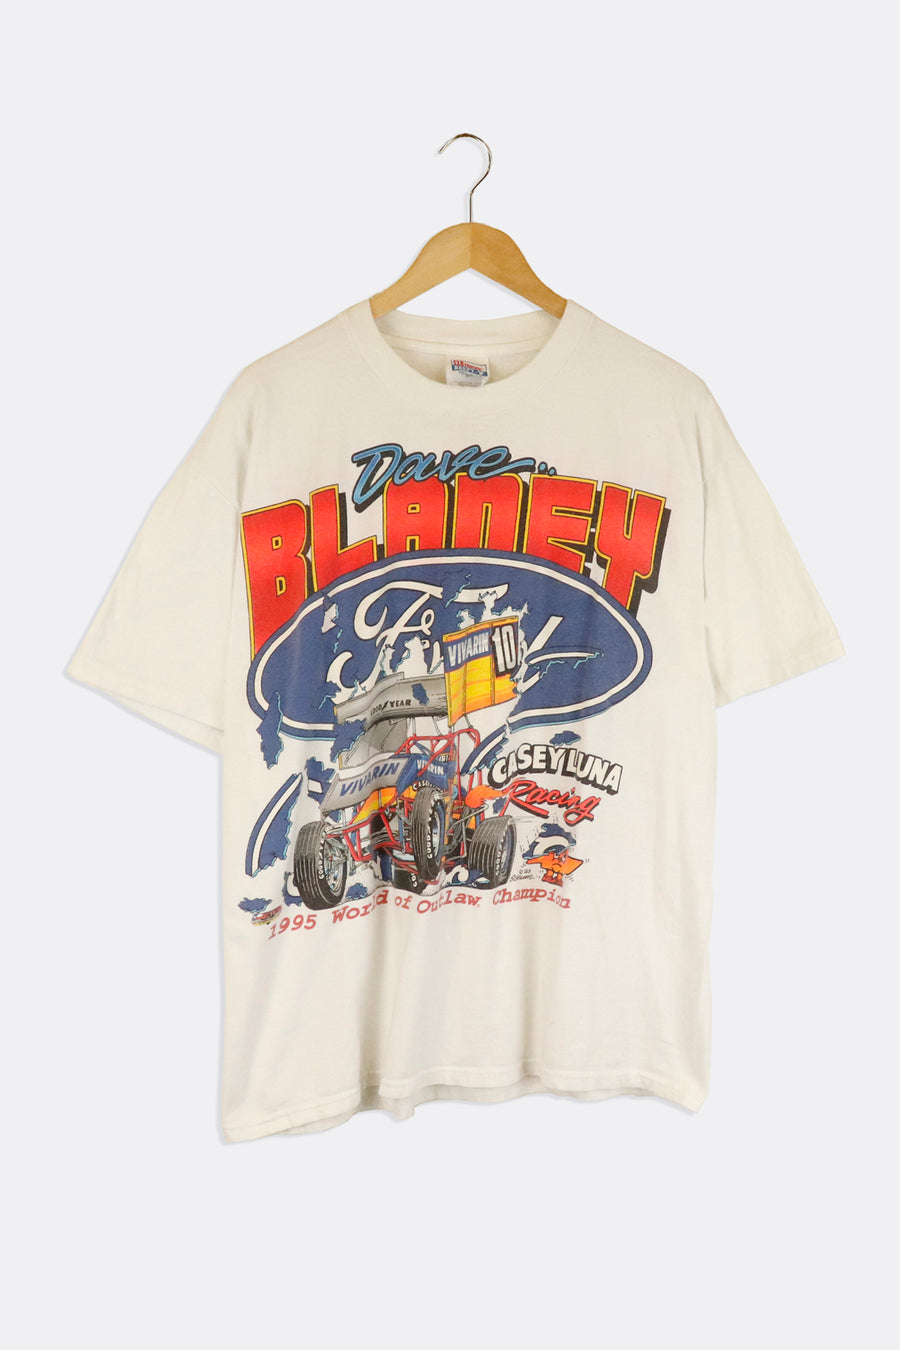 Vintage 1995 World Of Outlaw Champion Dave Blaney Graphic T Shirt Sz XL